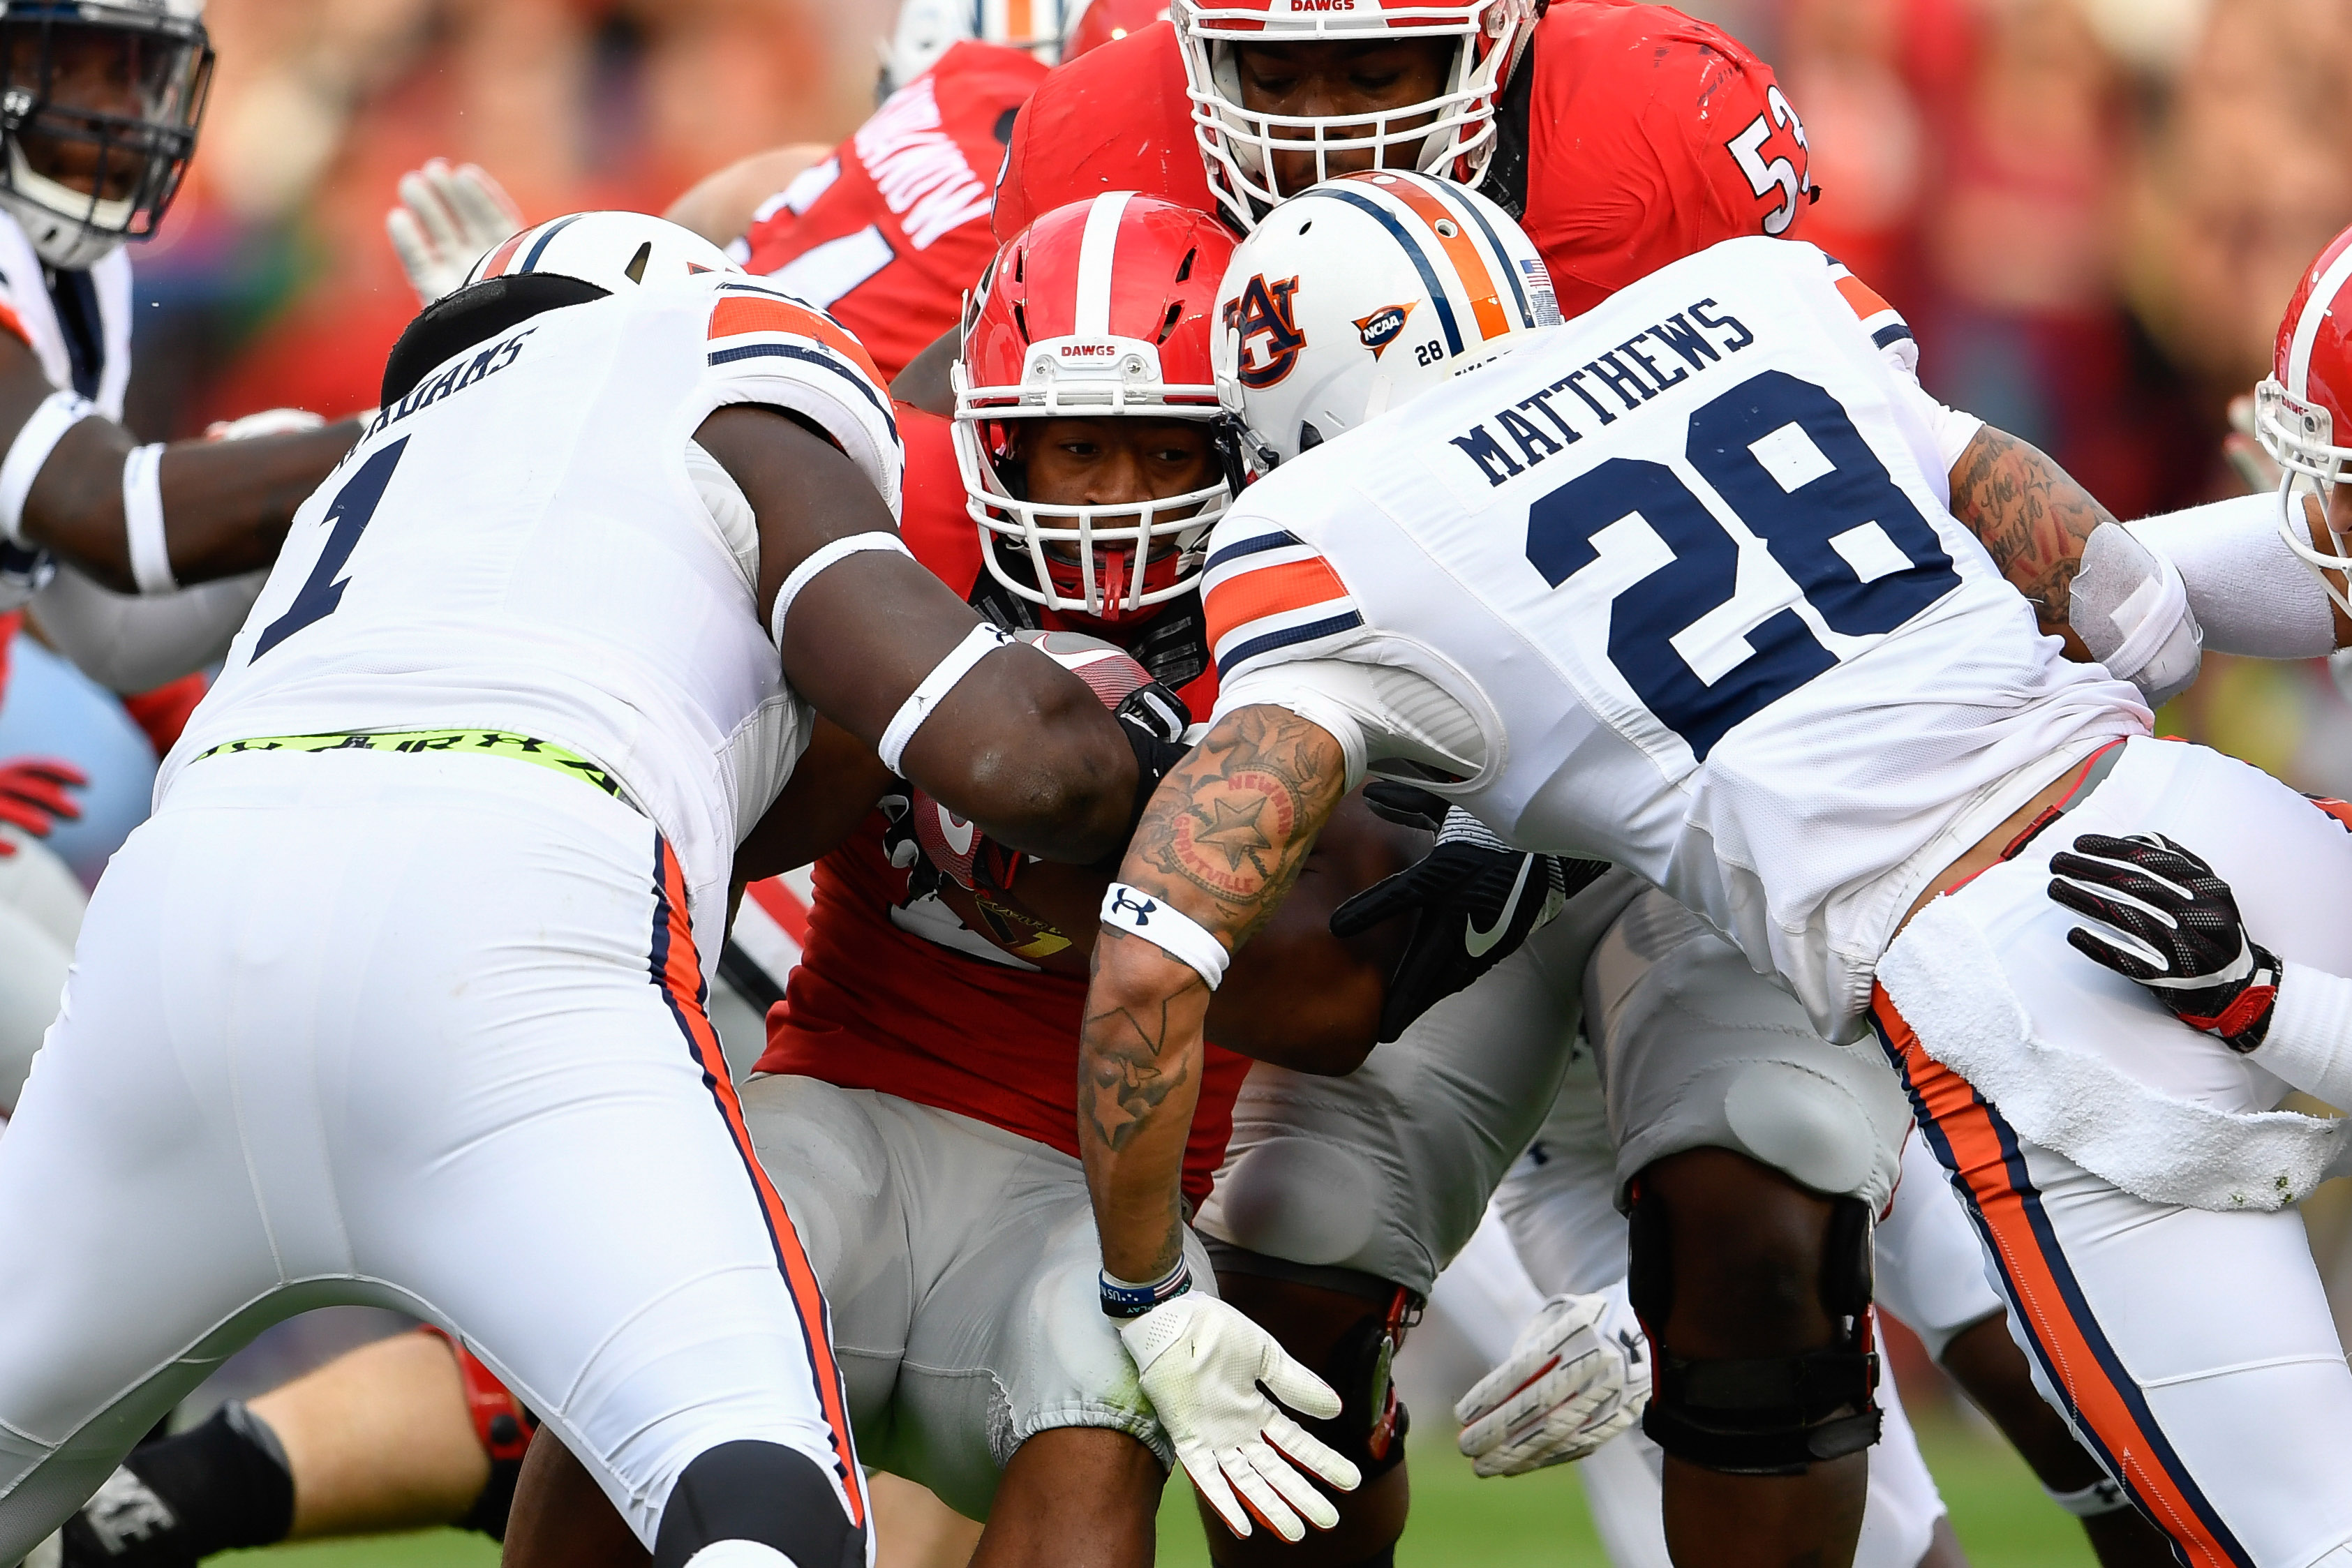 Nov 12, 2016; Athens, GA, USA; Georgia Bulldogs running back Nick Chubb (27) tackled by Auburn Tigers defensive tackle Montravius Adams (1) and defensive back Tray Matthews (28) during the first quarter at Sanford Stadium. Mandatory Credit: Dale Zanine-USA TODAY Sports